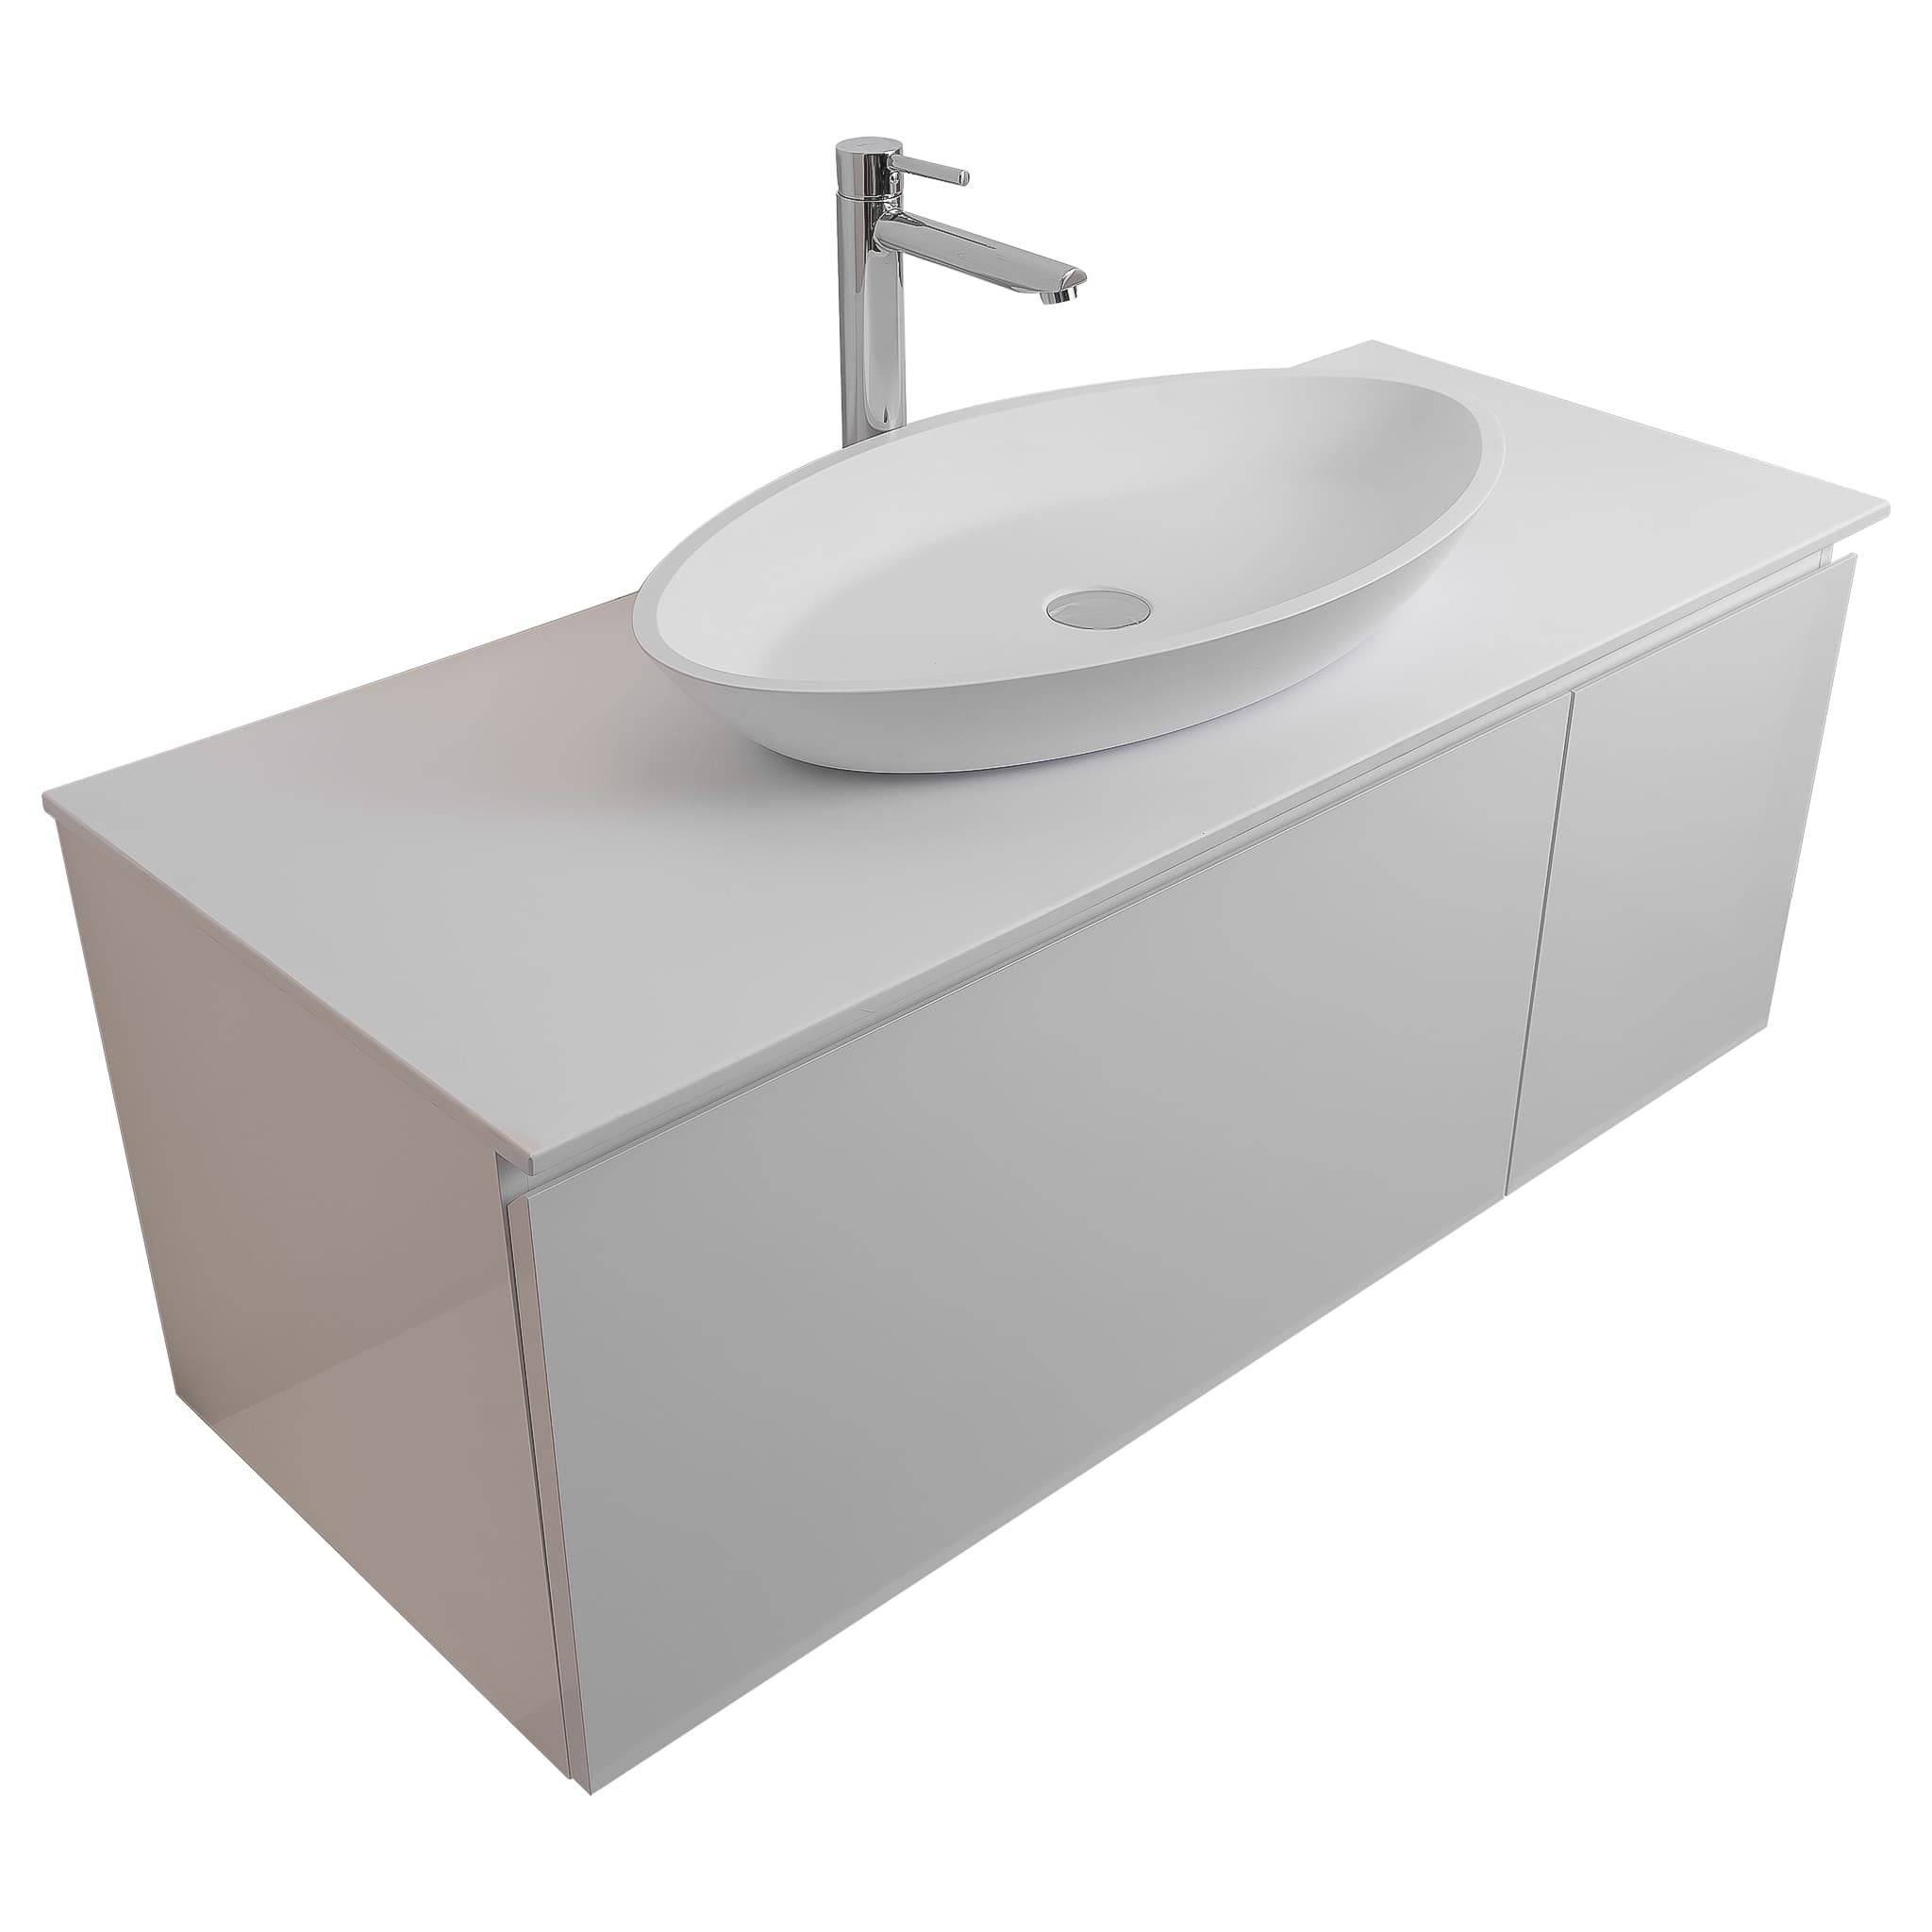 Venice 47.5 White High Gloss Cabinet, Solid Surface Flat White Counter And Oval Solid Surface White Basin 1305, Wall Mounted Modern Vanity Set